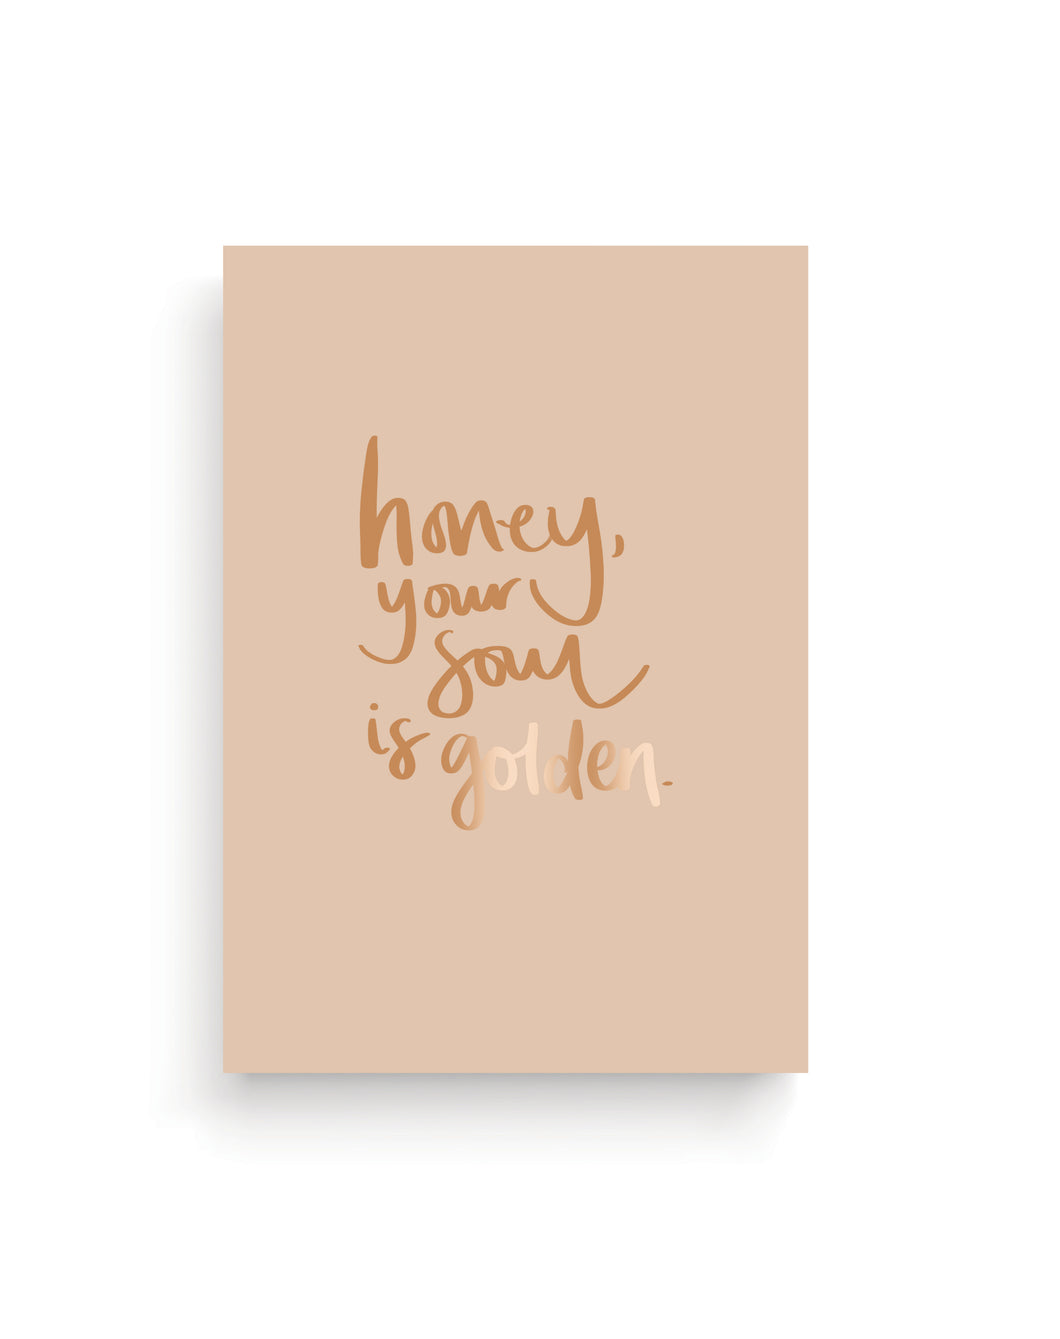 Honey, Your Soul Is Golden A5 Print